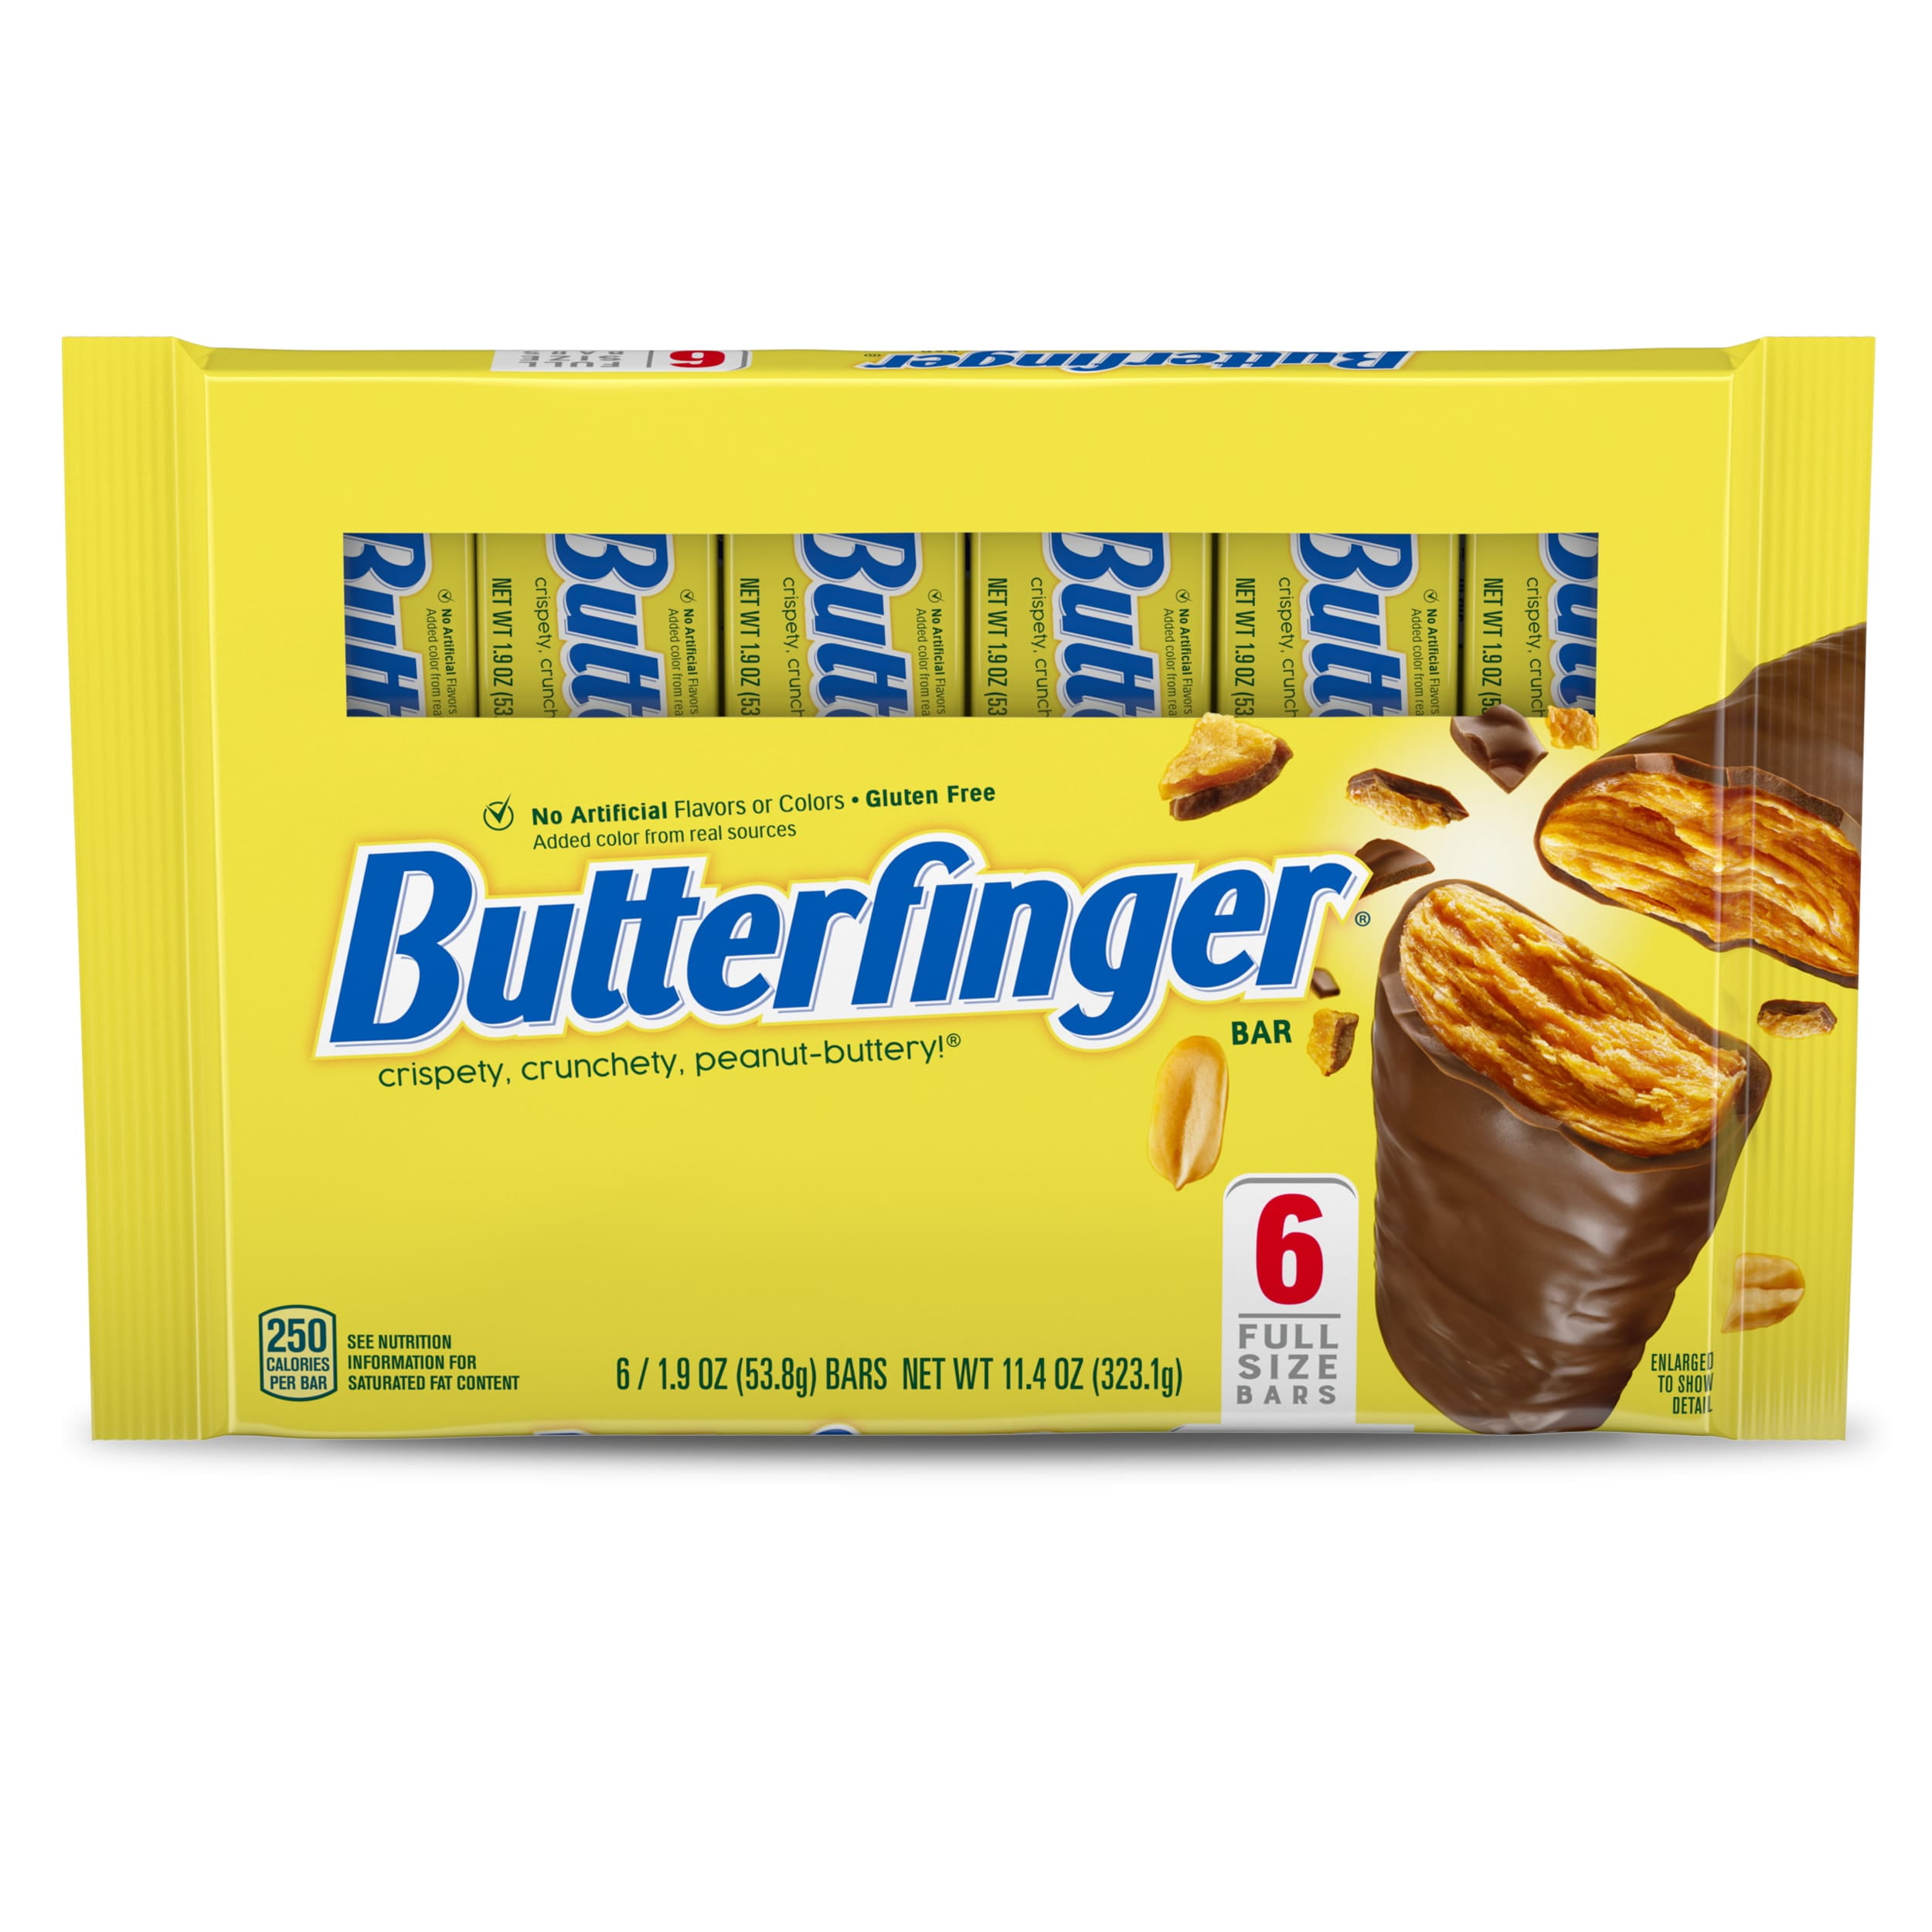 Butterfinger Chocolatey, Peanut-Buttery, Full Size Candy Bars, Easter Basket Stuffers, 1.9 oz each